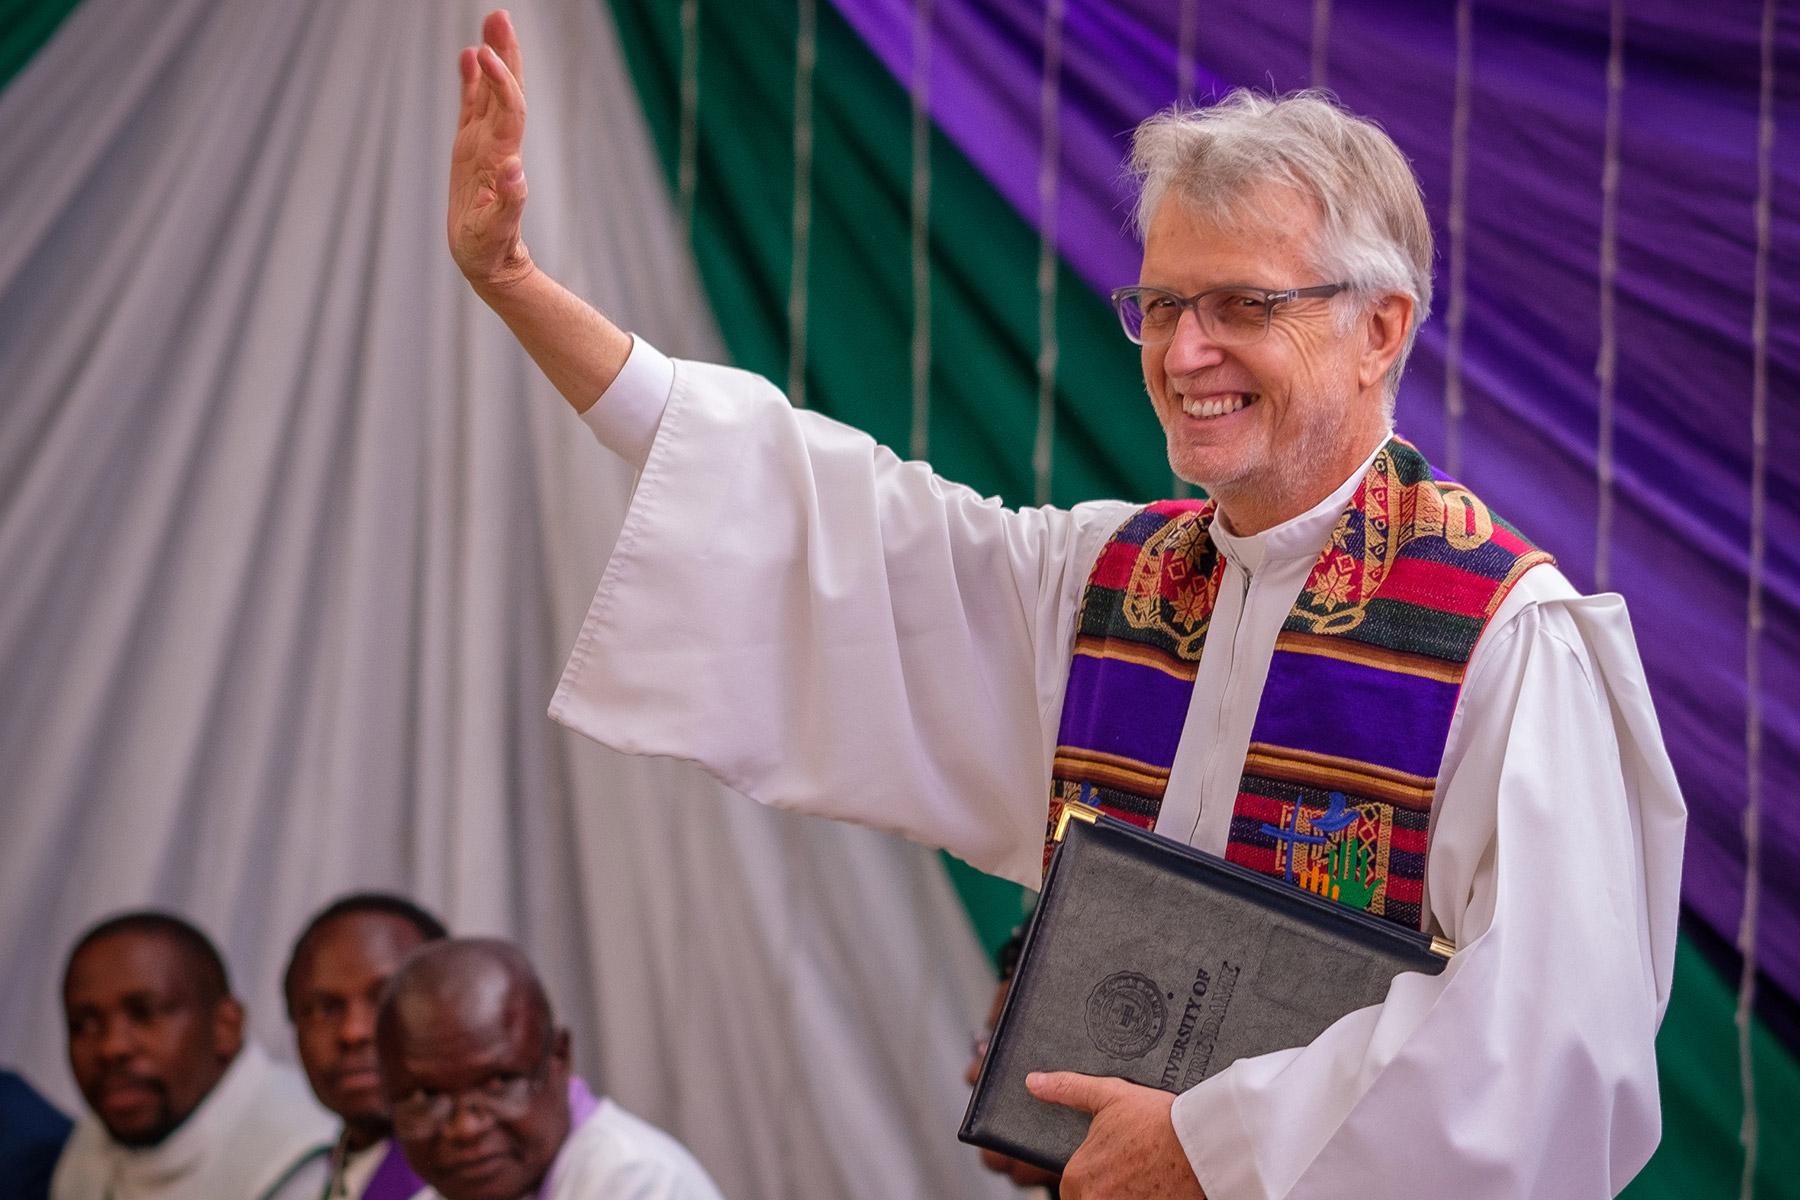 Rev. Martin Junge during a solidarity visit to Zimbabwe in March 2020. Photo: LWF/A. Danielsson